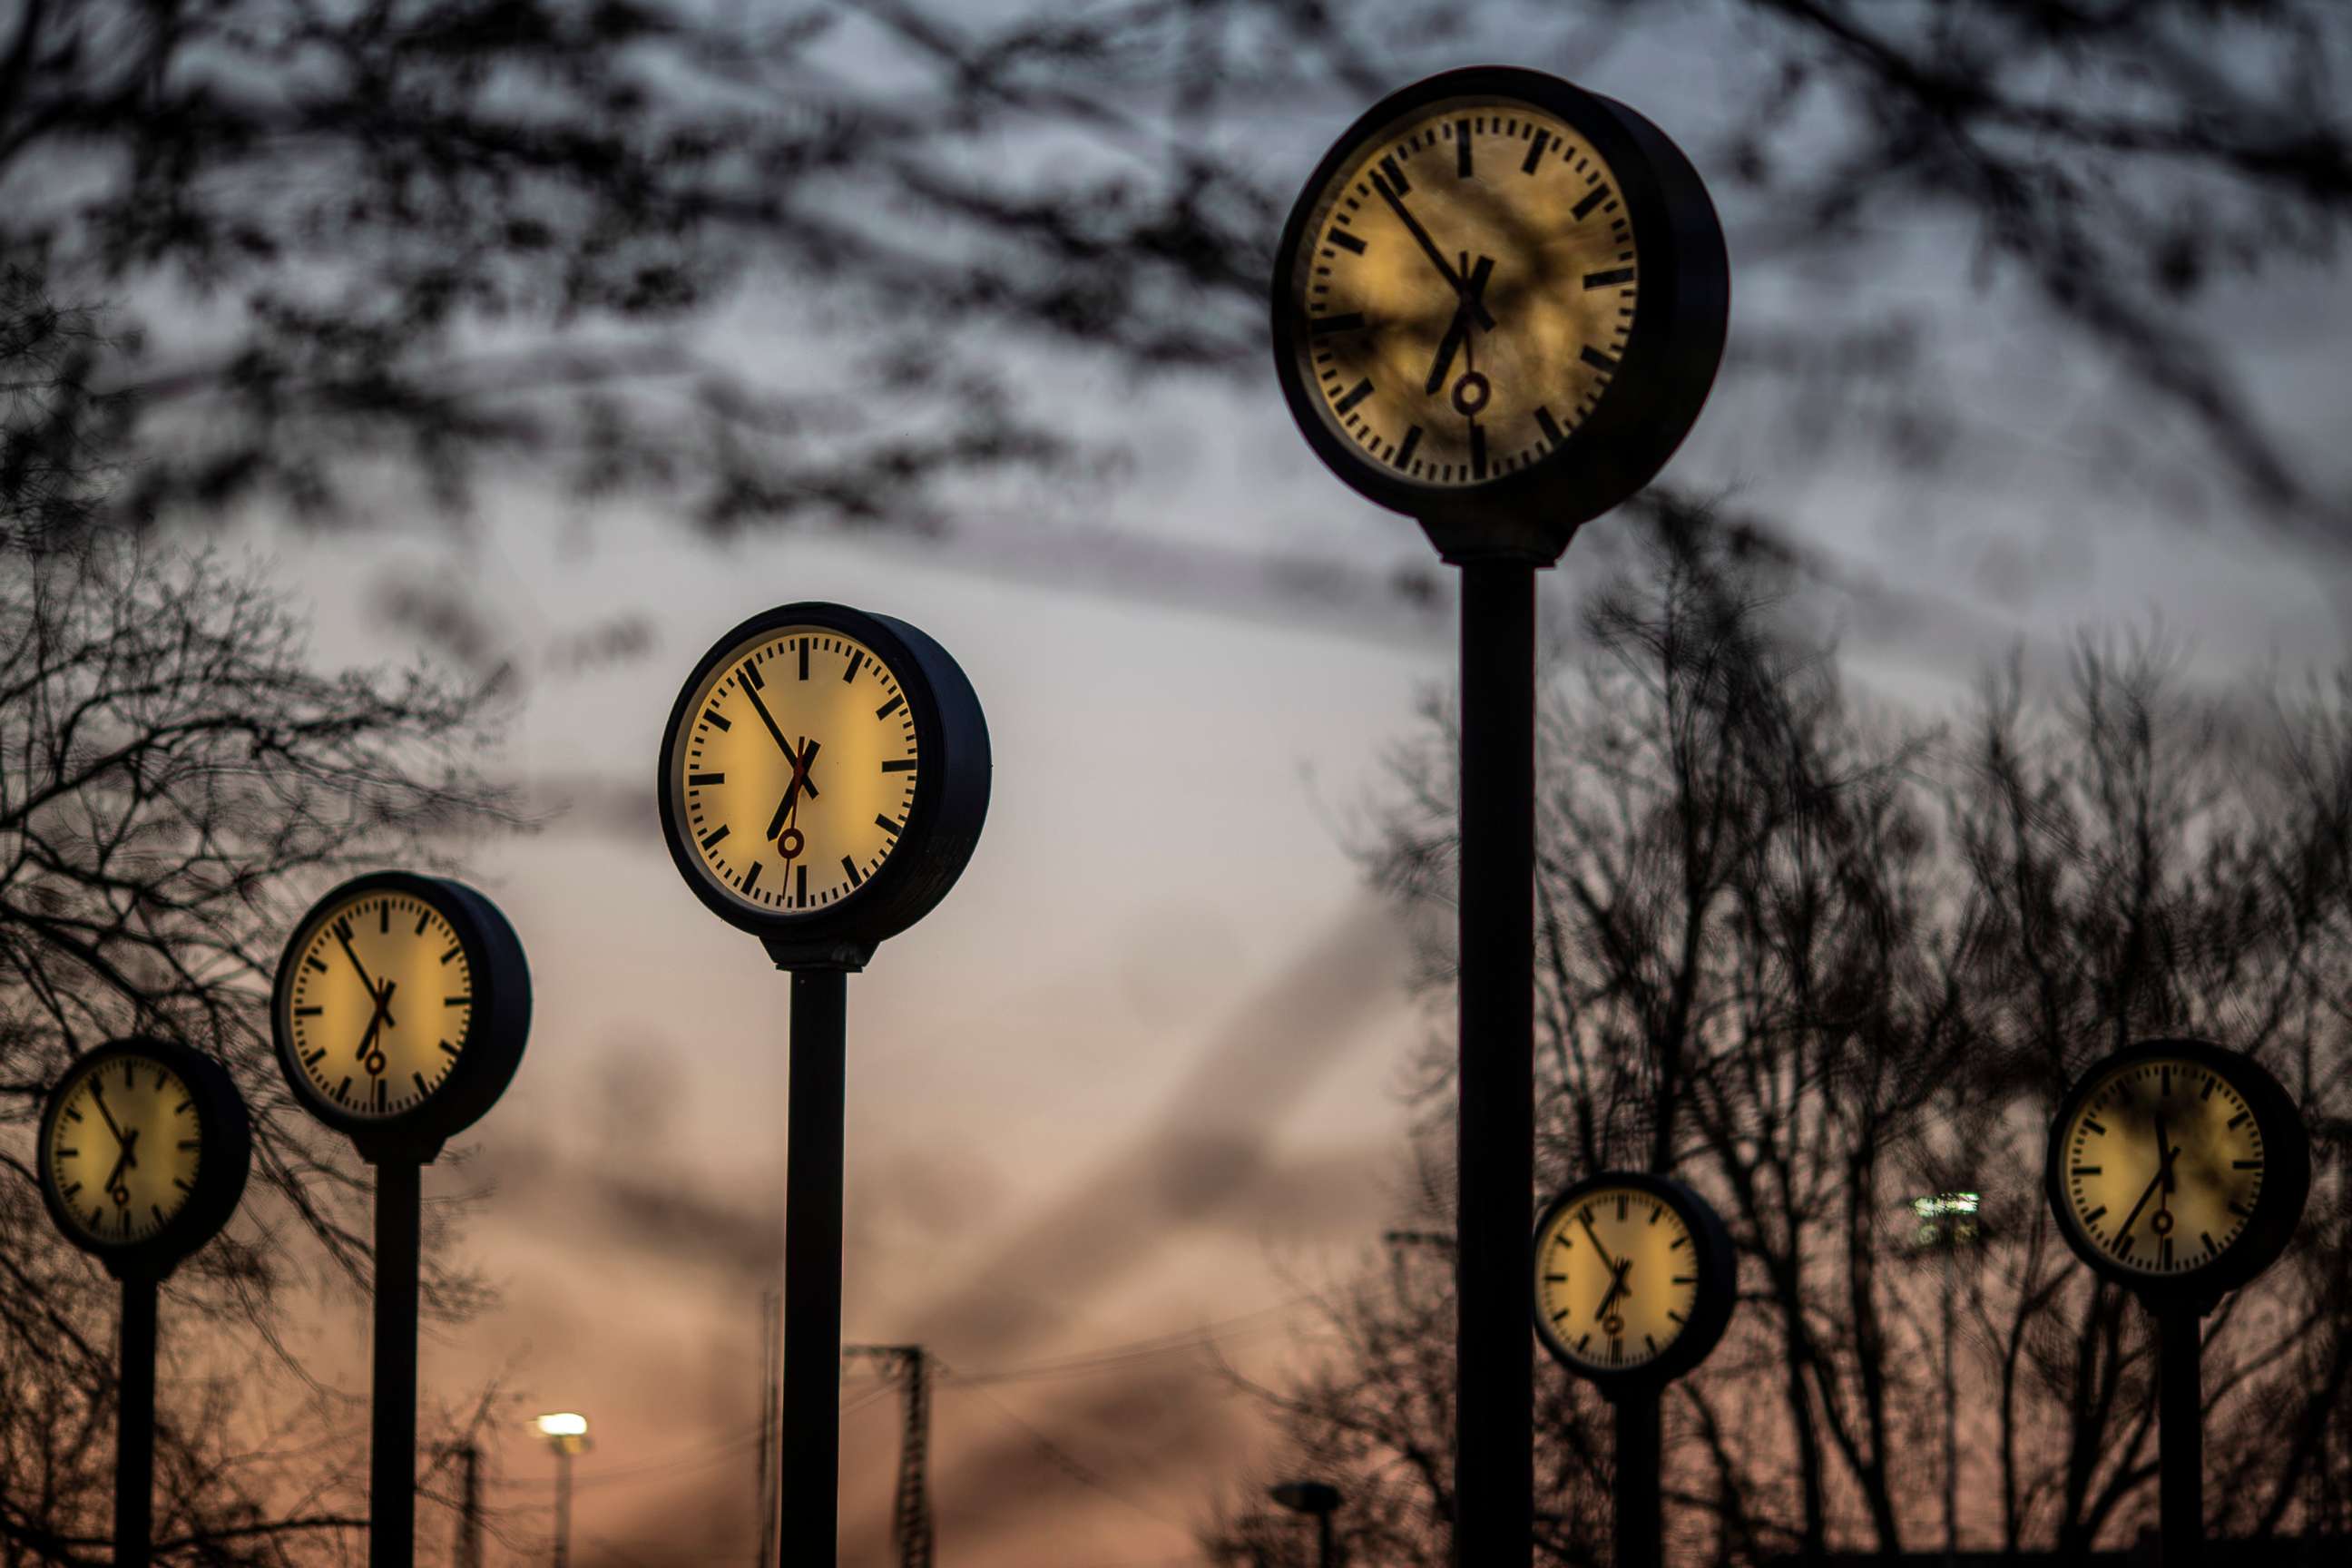 PHOTO: The "Zeitfeld" (Time Field) clock installation by Klaus Rinke is seen at the entrance of the Suedpark on March 29, 2019, in Dusseldorf Germany.